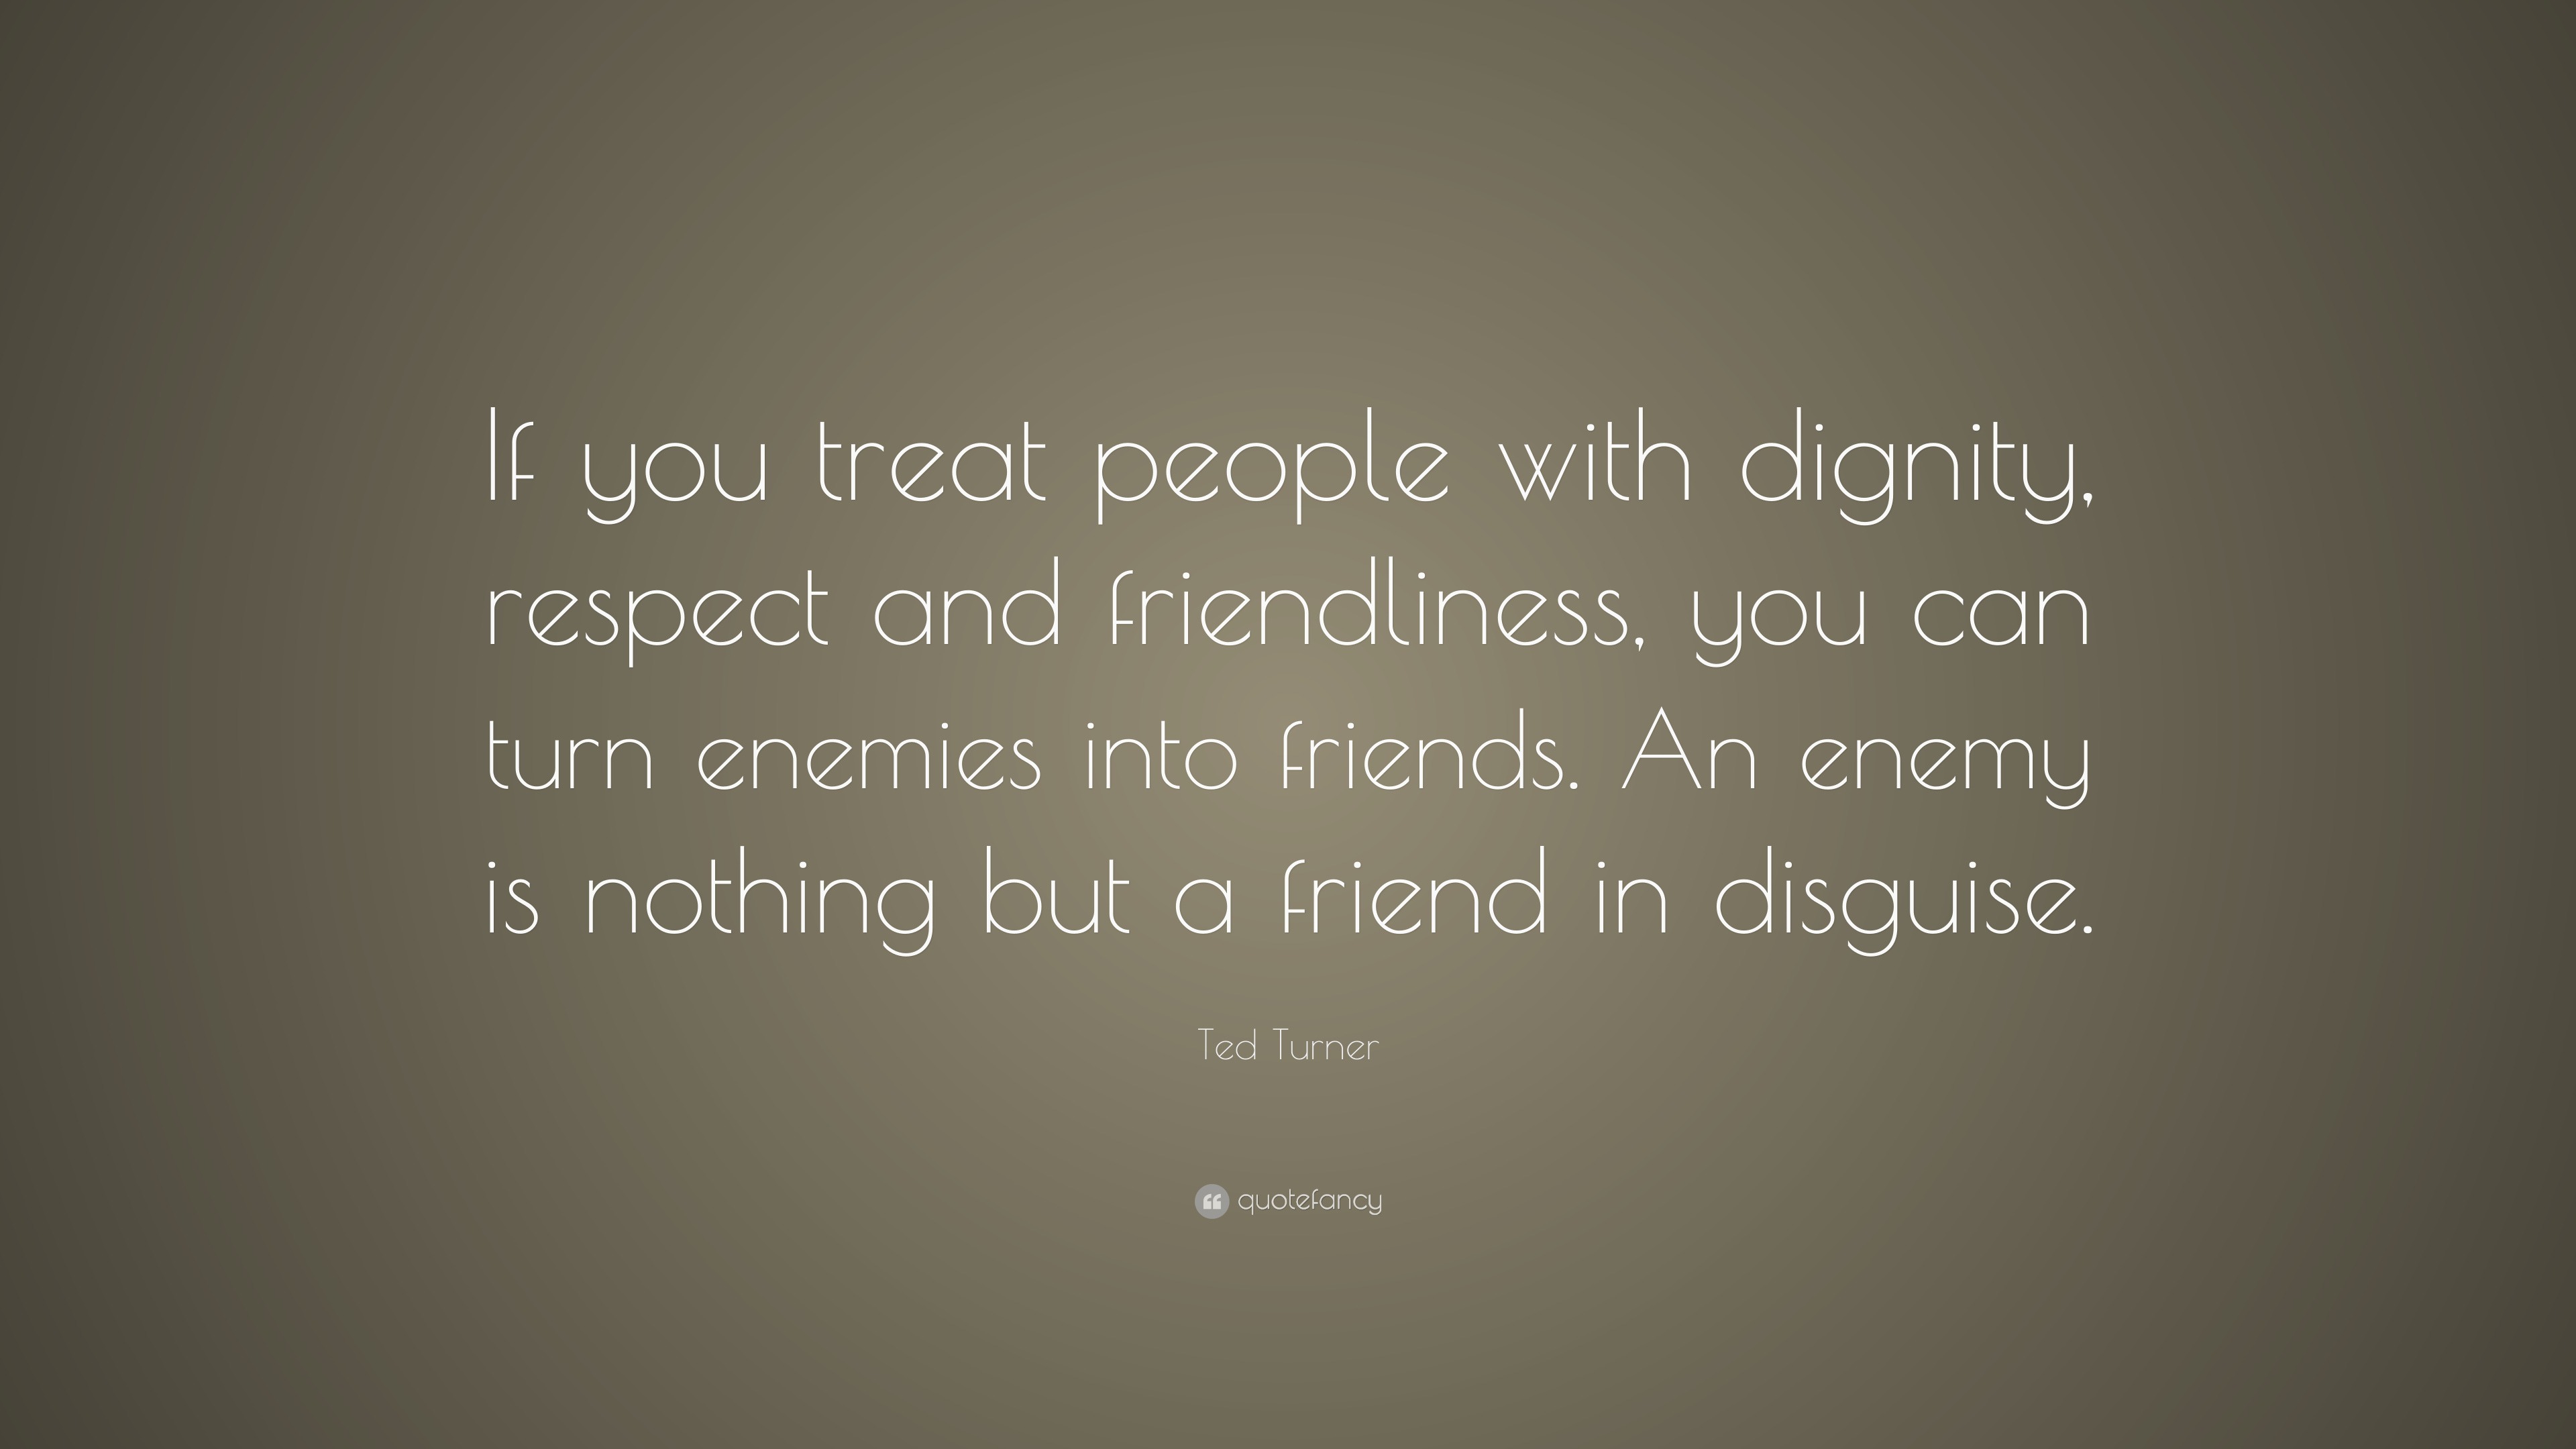 Ted Turner Quote If You Treat People With Dignity Respect And Friendliness You Can Turn Enemies Into Friends An Enemy Is Nothing But A